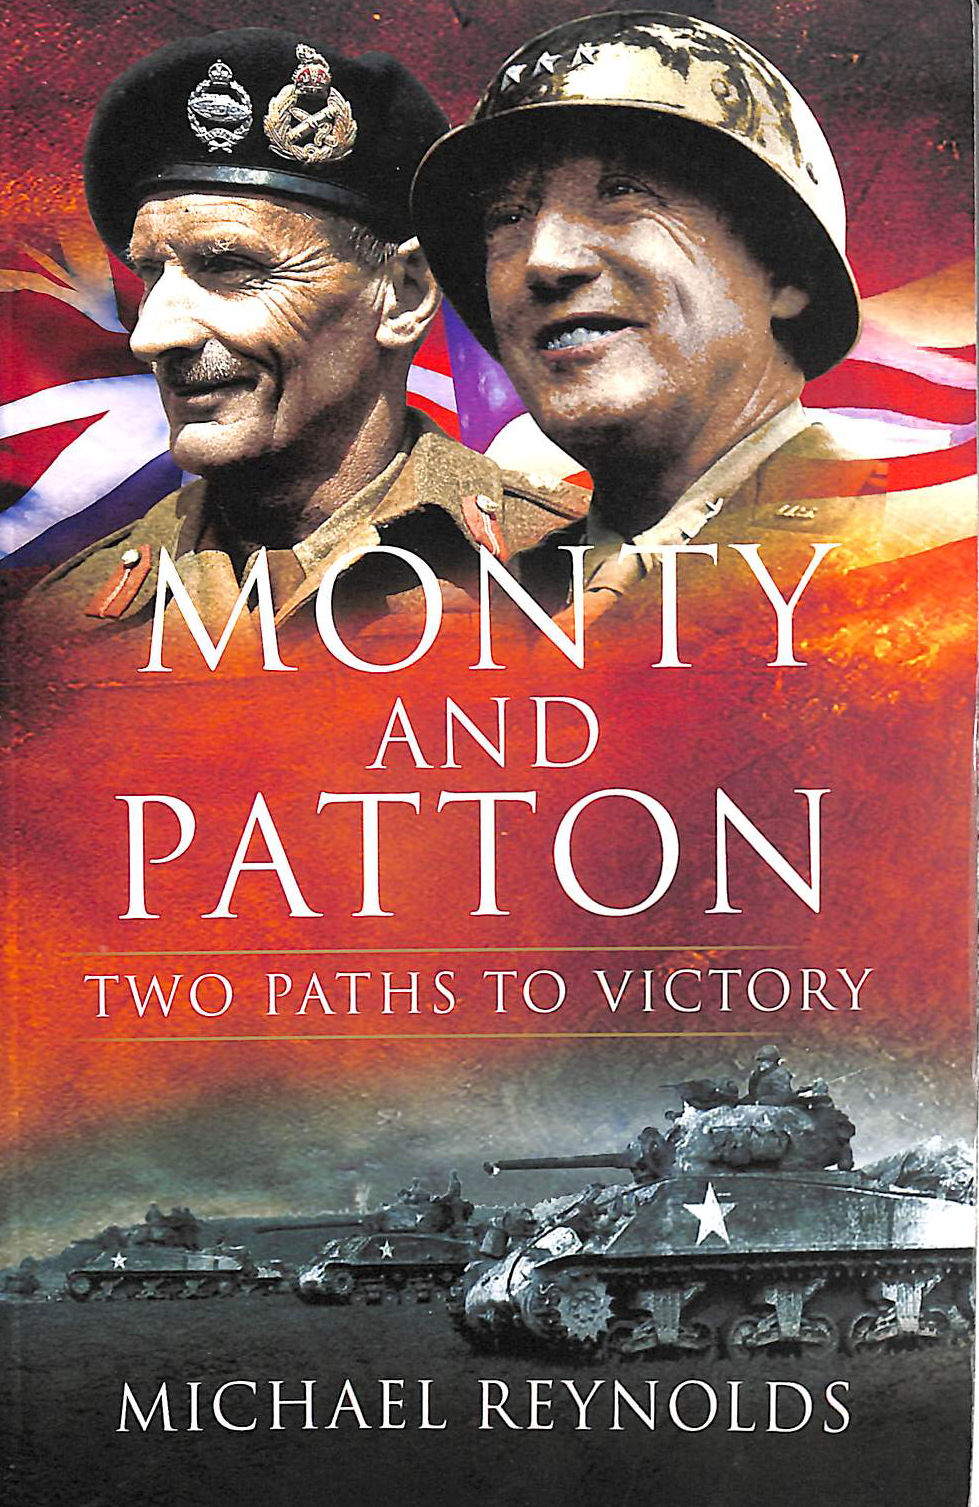 MICHAEL REYNOLDS - Monty and Patton: Two Paths to Victory